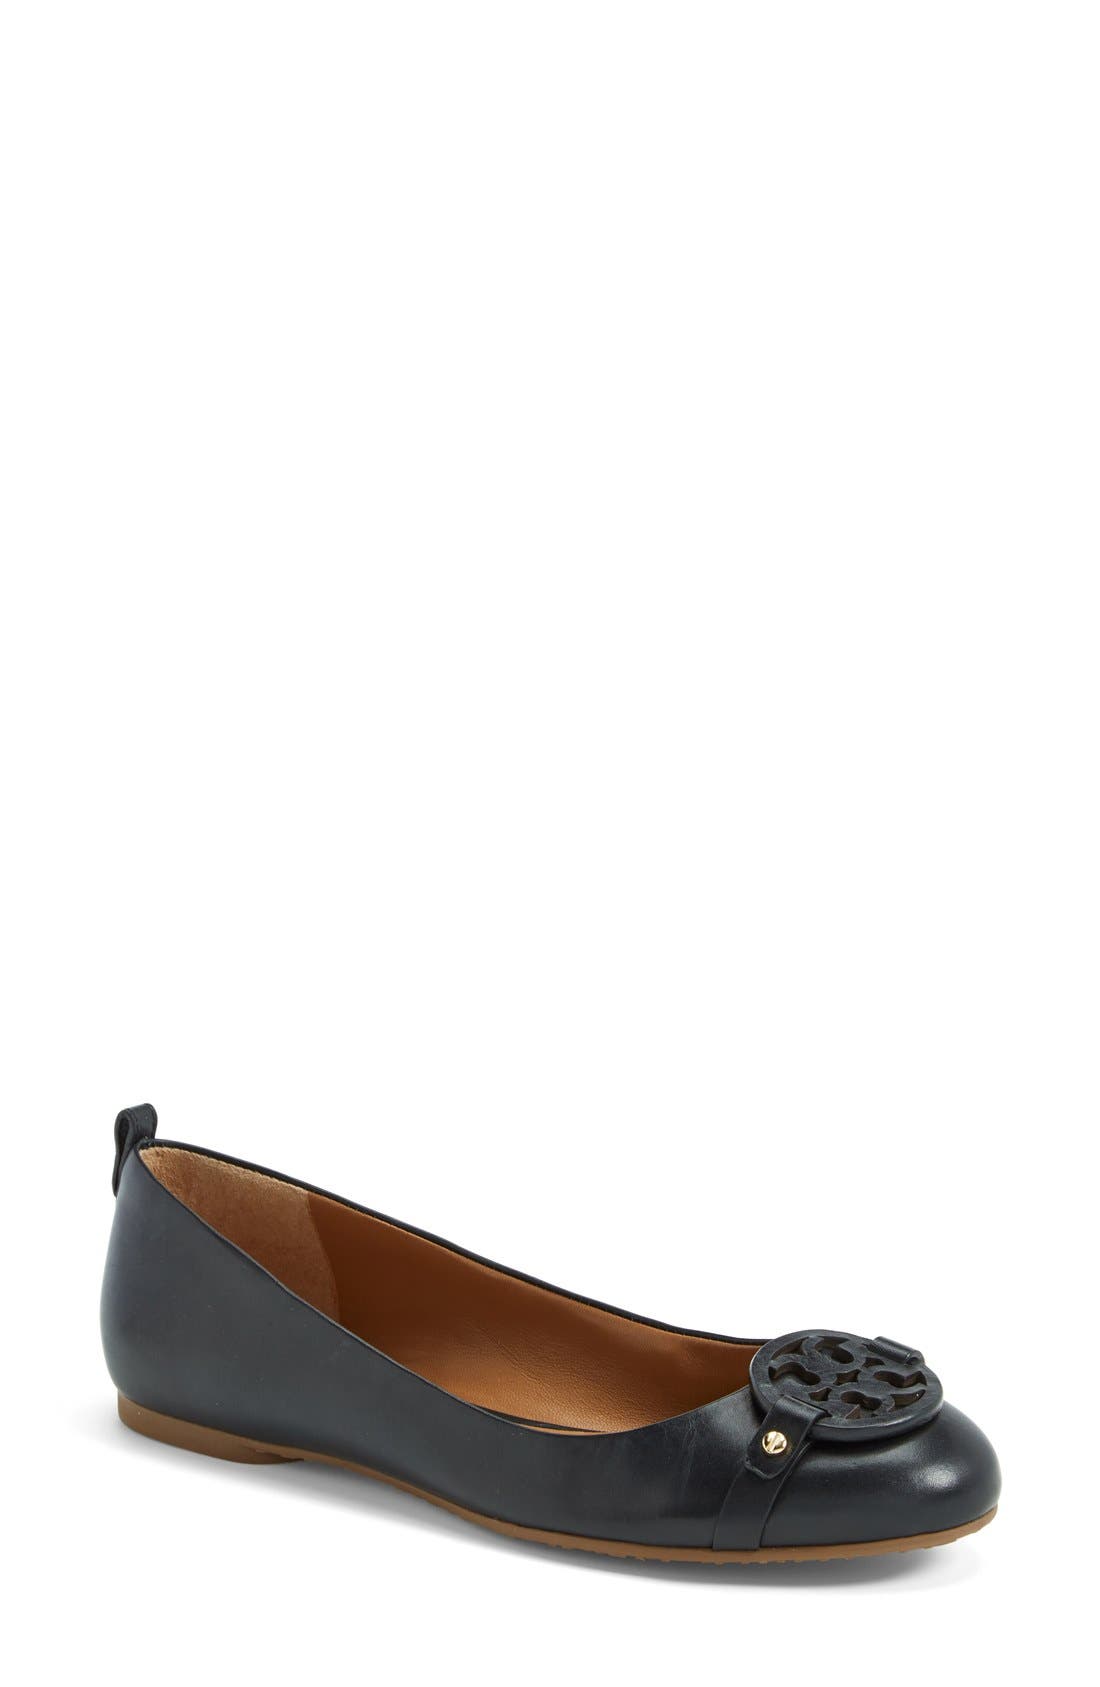 tory burch leather flats